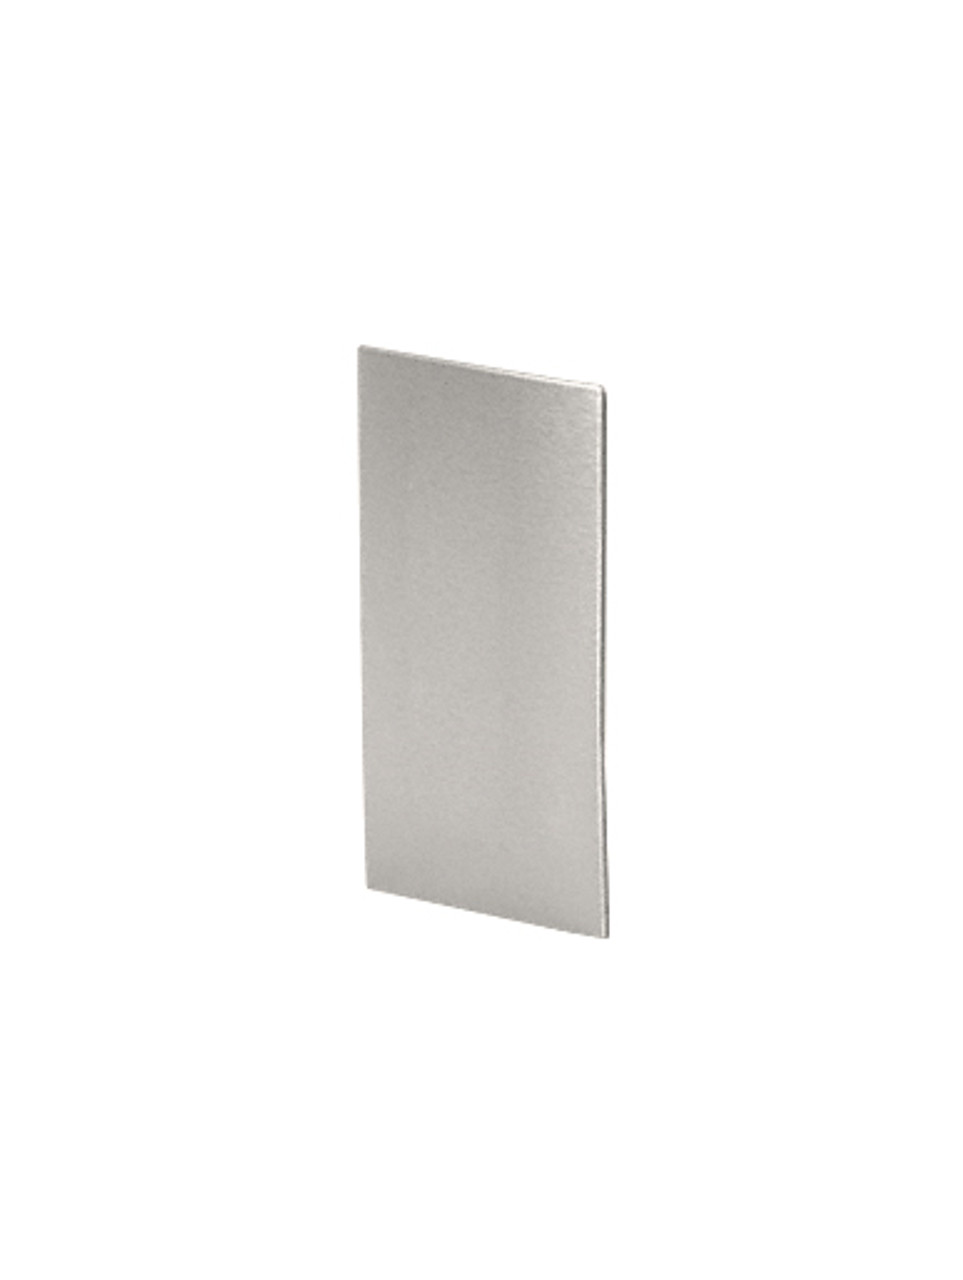 EC42524X2XXPS (Shoe Base) Polished Stainless End Cap for Standard Square Base Shoe 